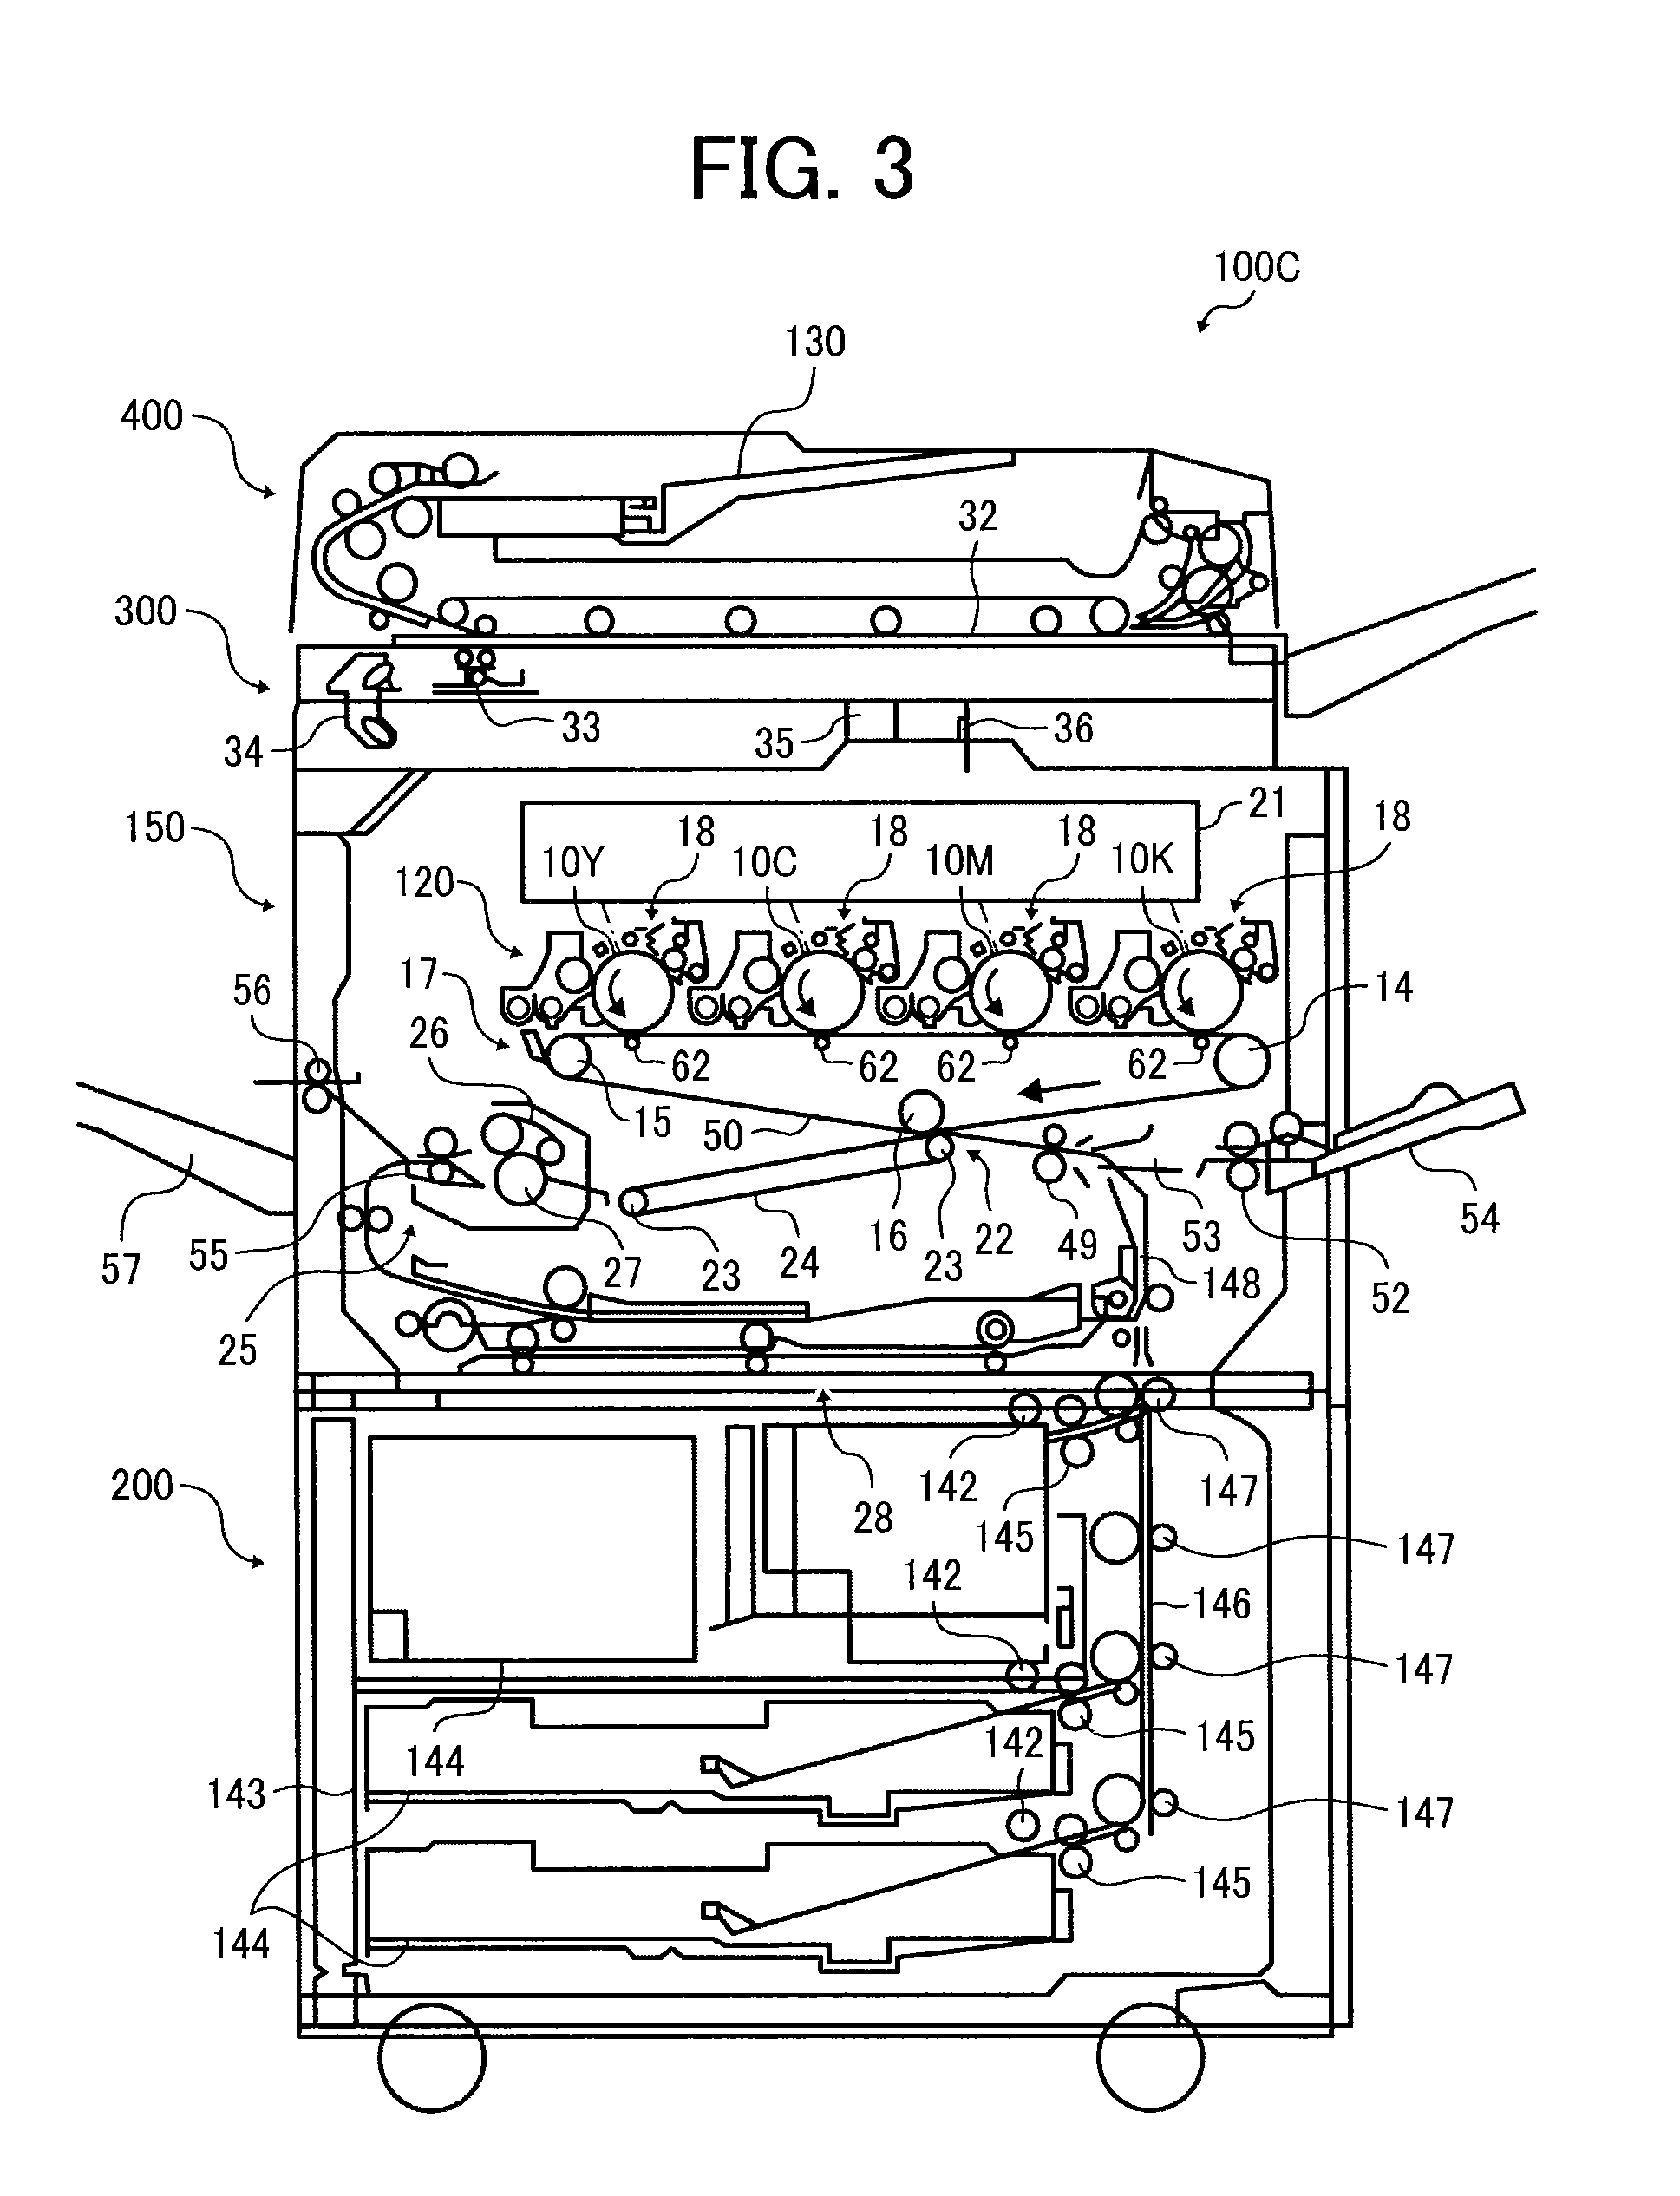 Toner, and developer and image forming apparatus using the toner